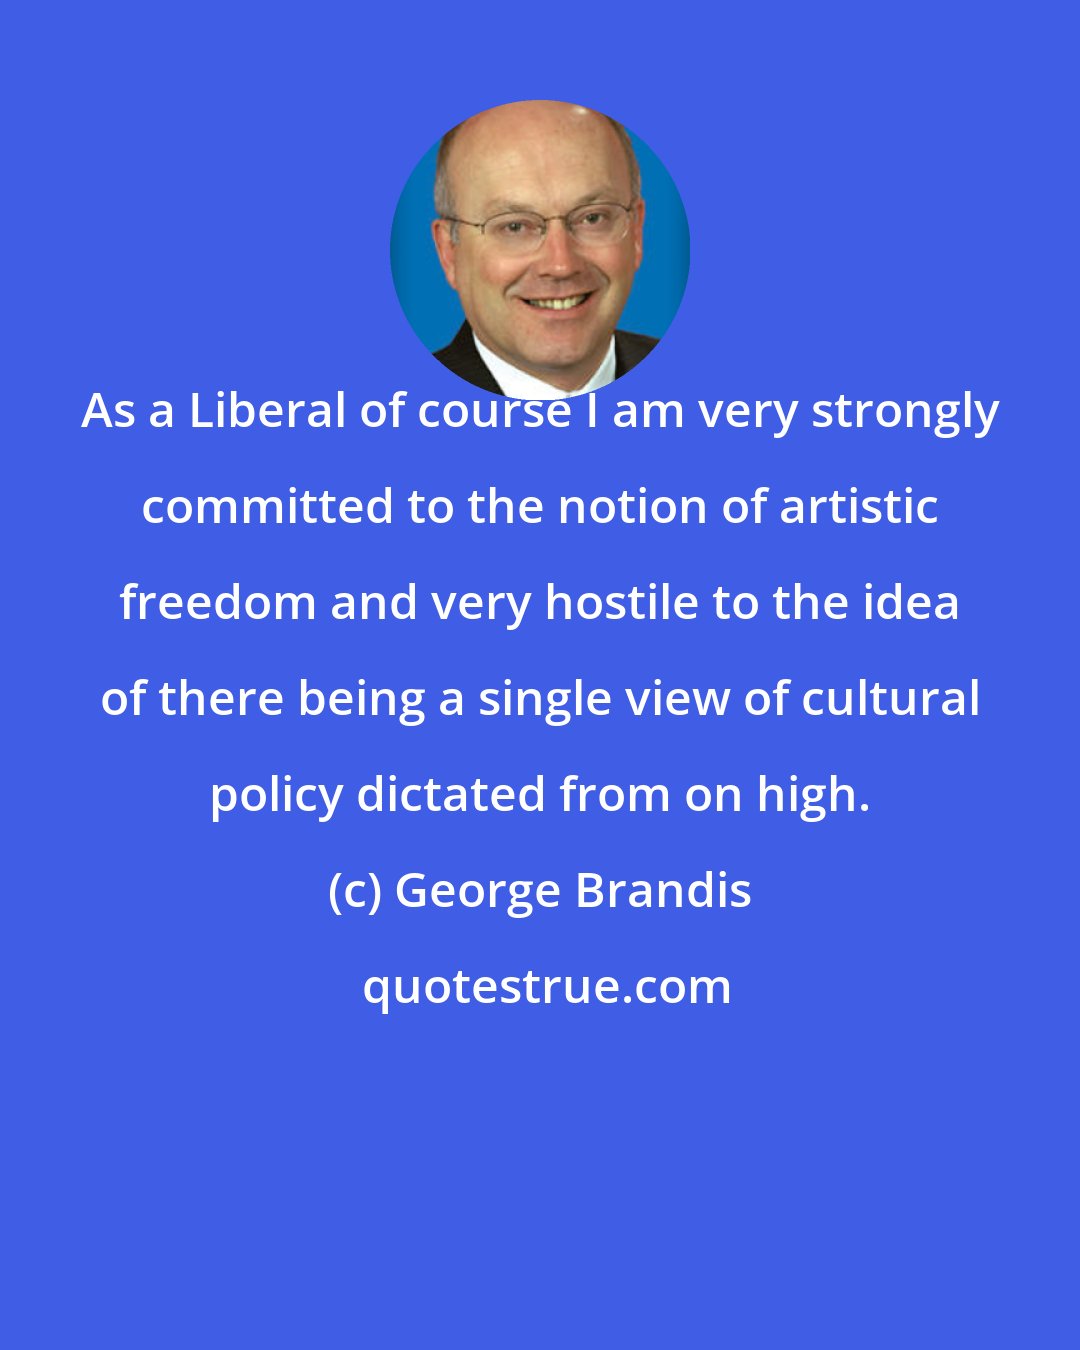 George Brandis: As a Liberal of course I am very strongly committed to the notion of artistic freedom and very hostile to the idea of there being a single view of cultural policy dictated from on high.